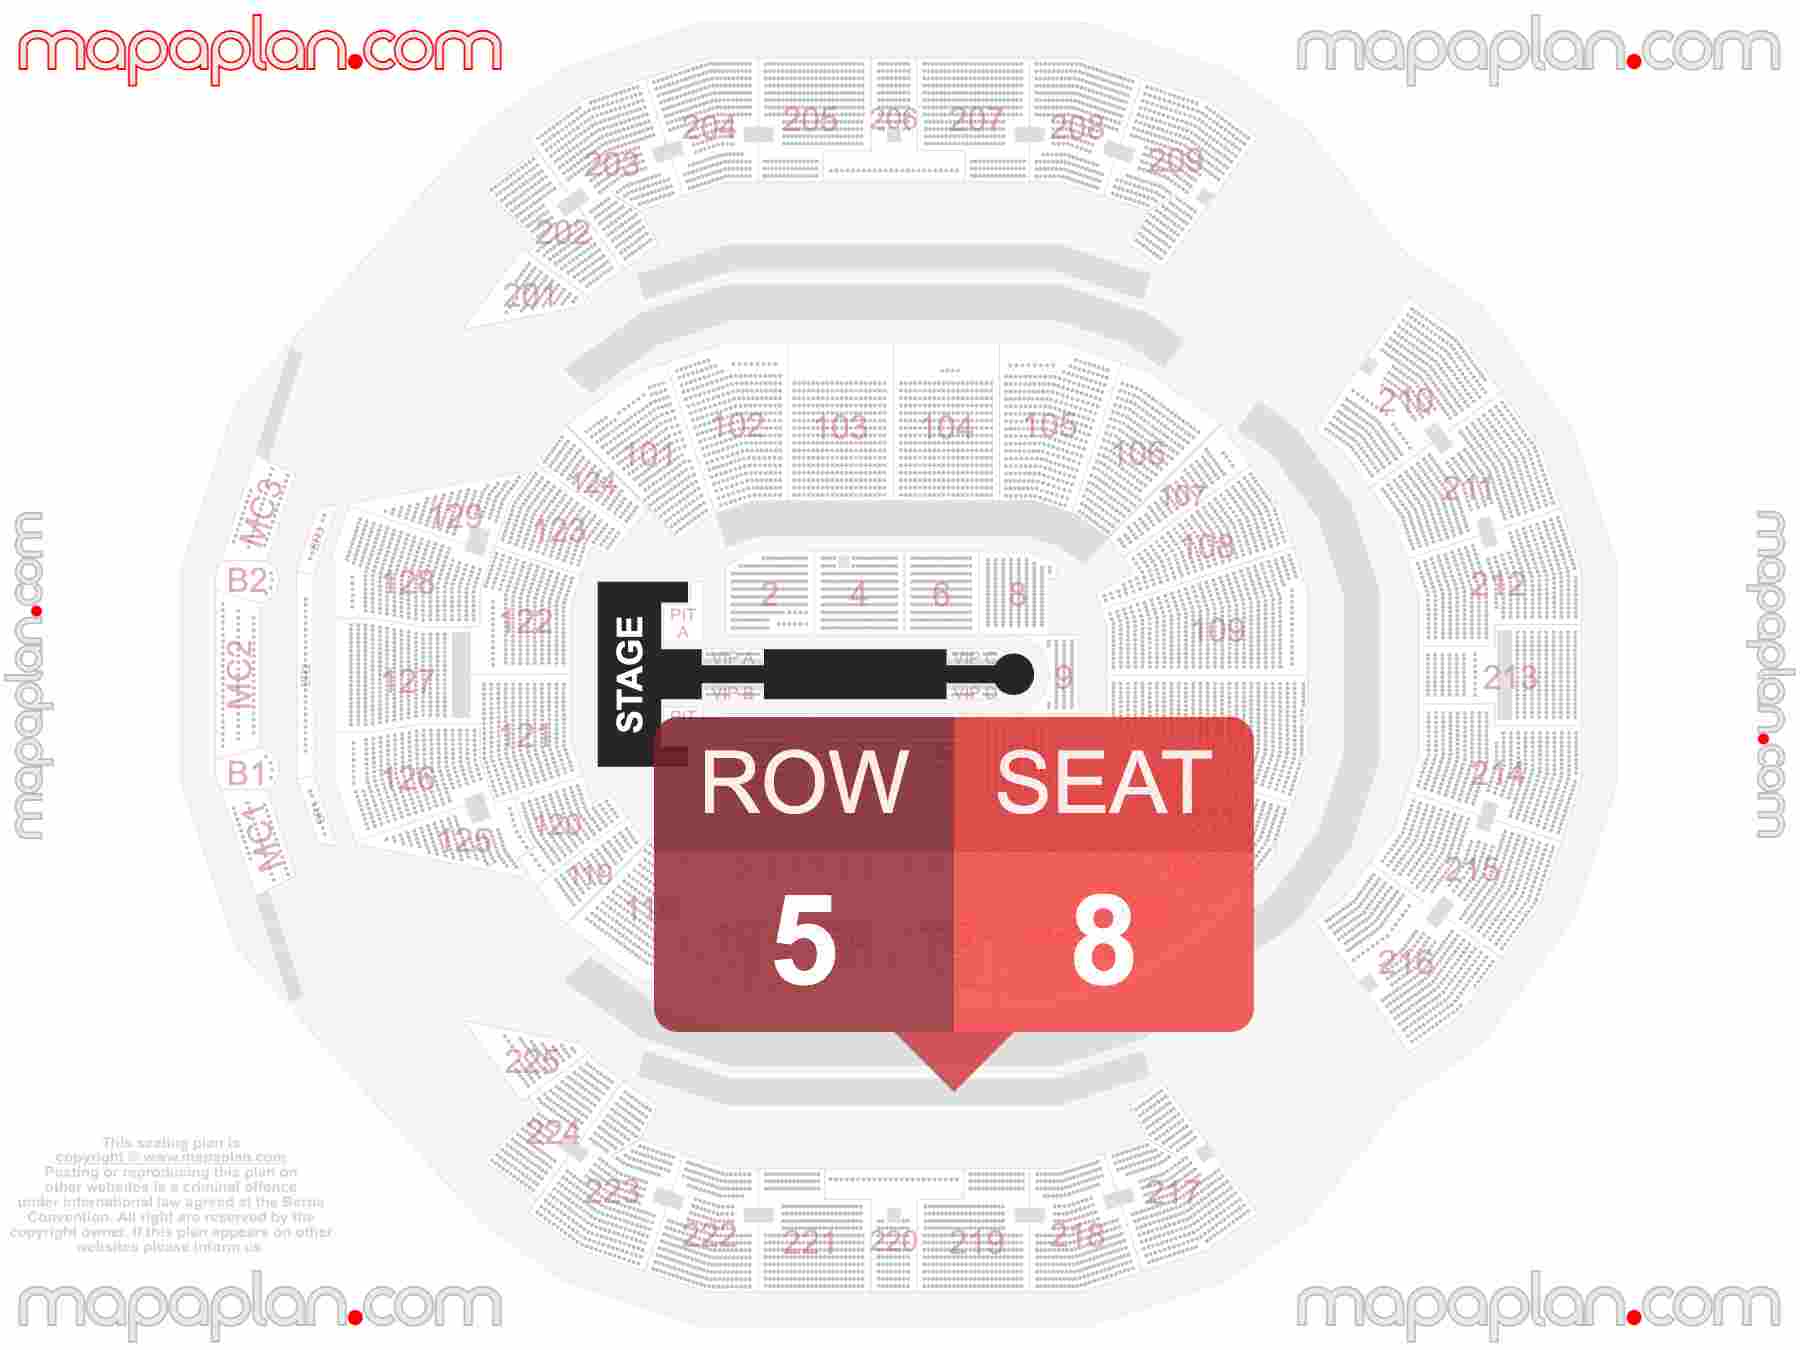 San Francisco Chase Center seating chart Catwalk extended runway concert B-stage seating chart with exact section numbers showing best rows and seats selection 3d layout - Best interactive seat finder tool with precise detailed location data